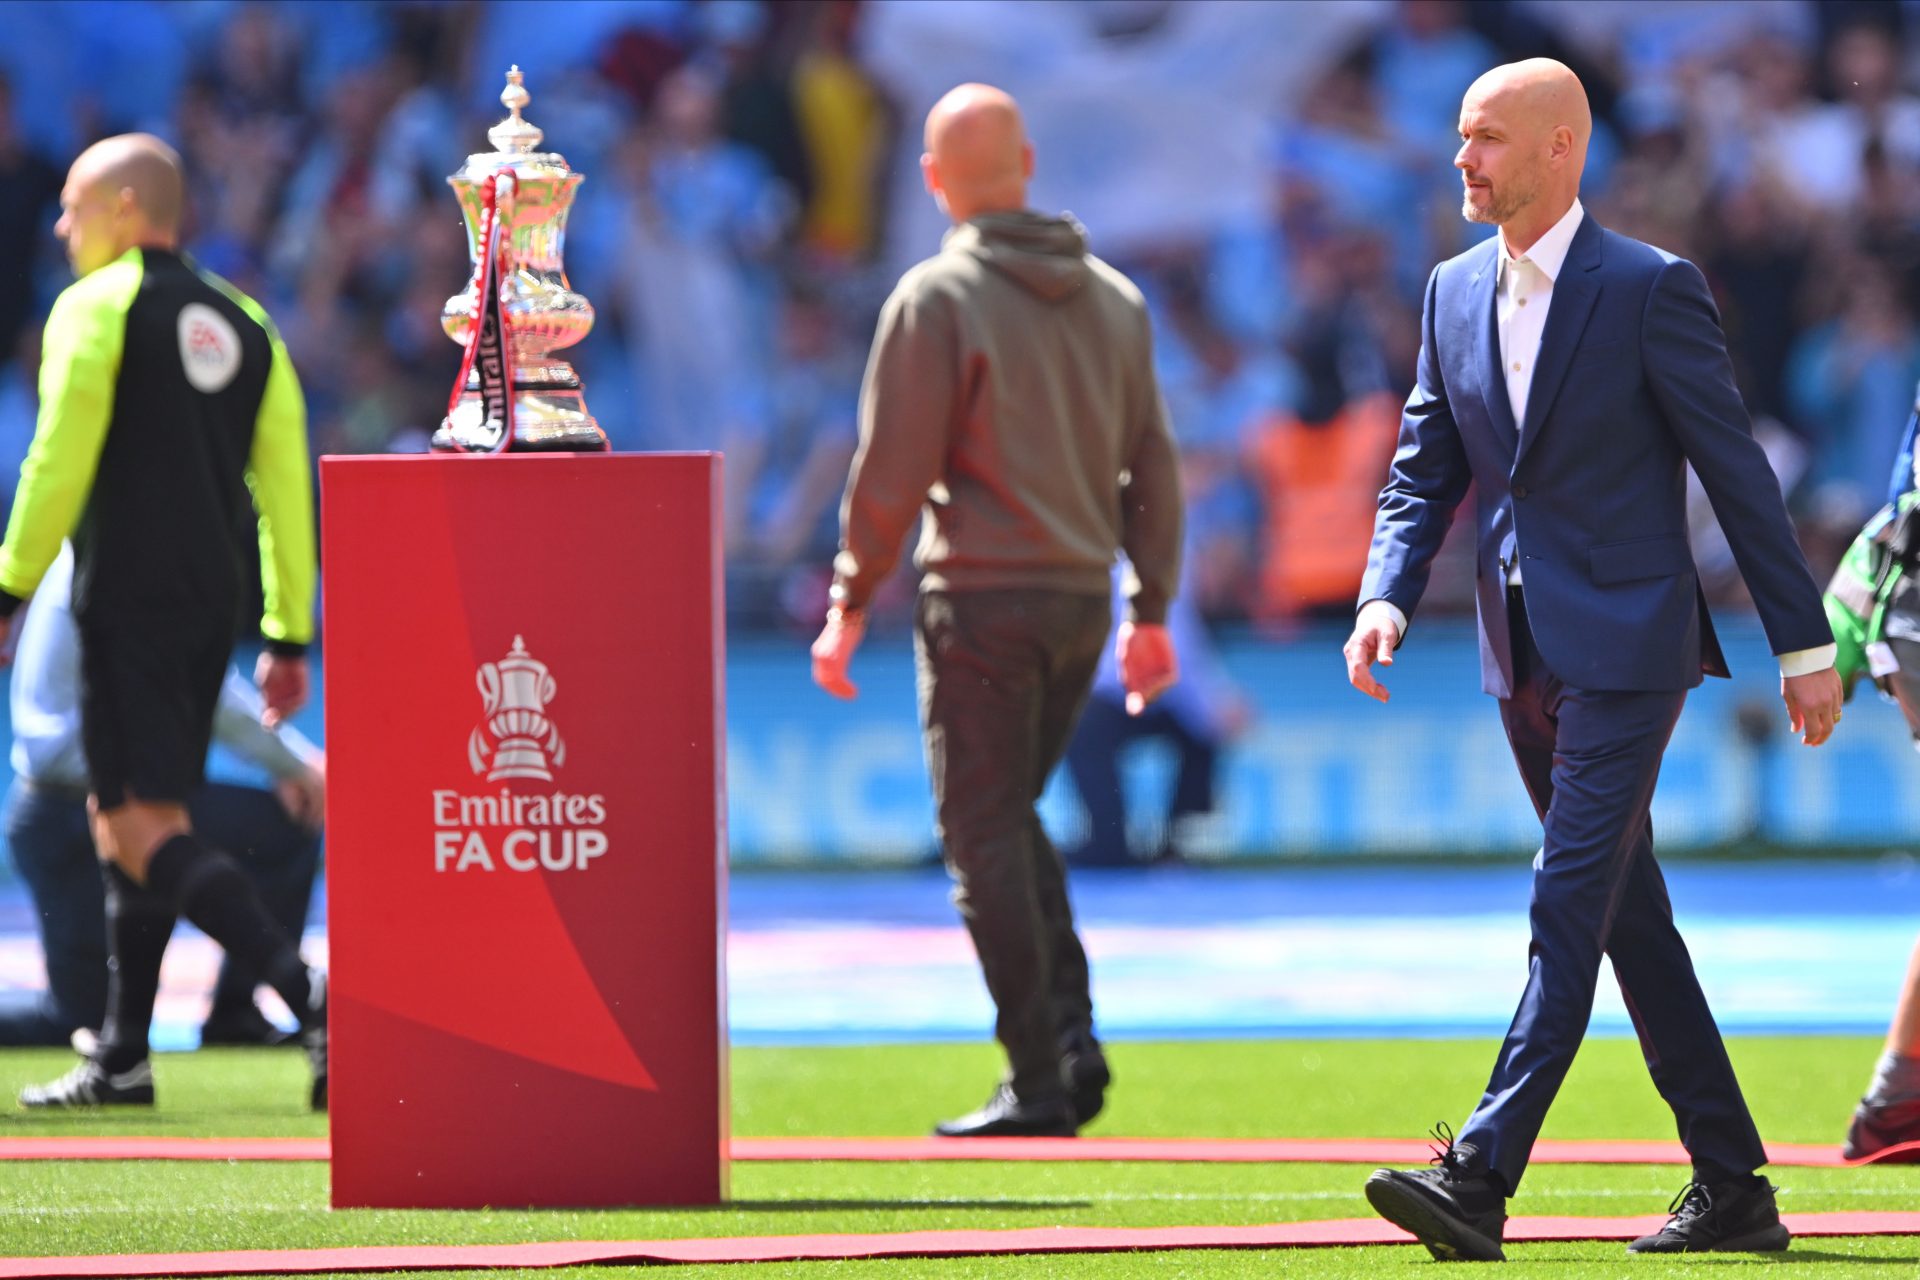 Scrapping FA Cup replays – what does it mean for English football?